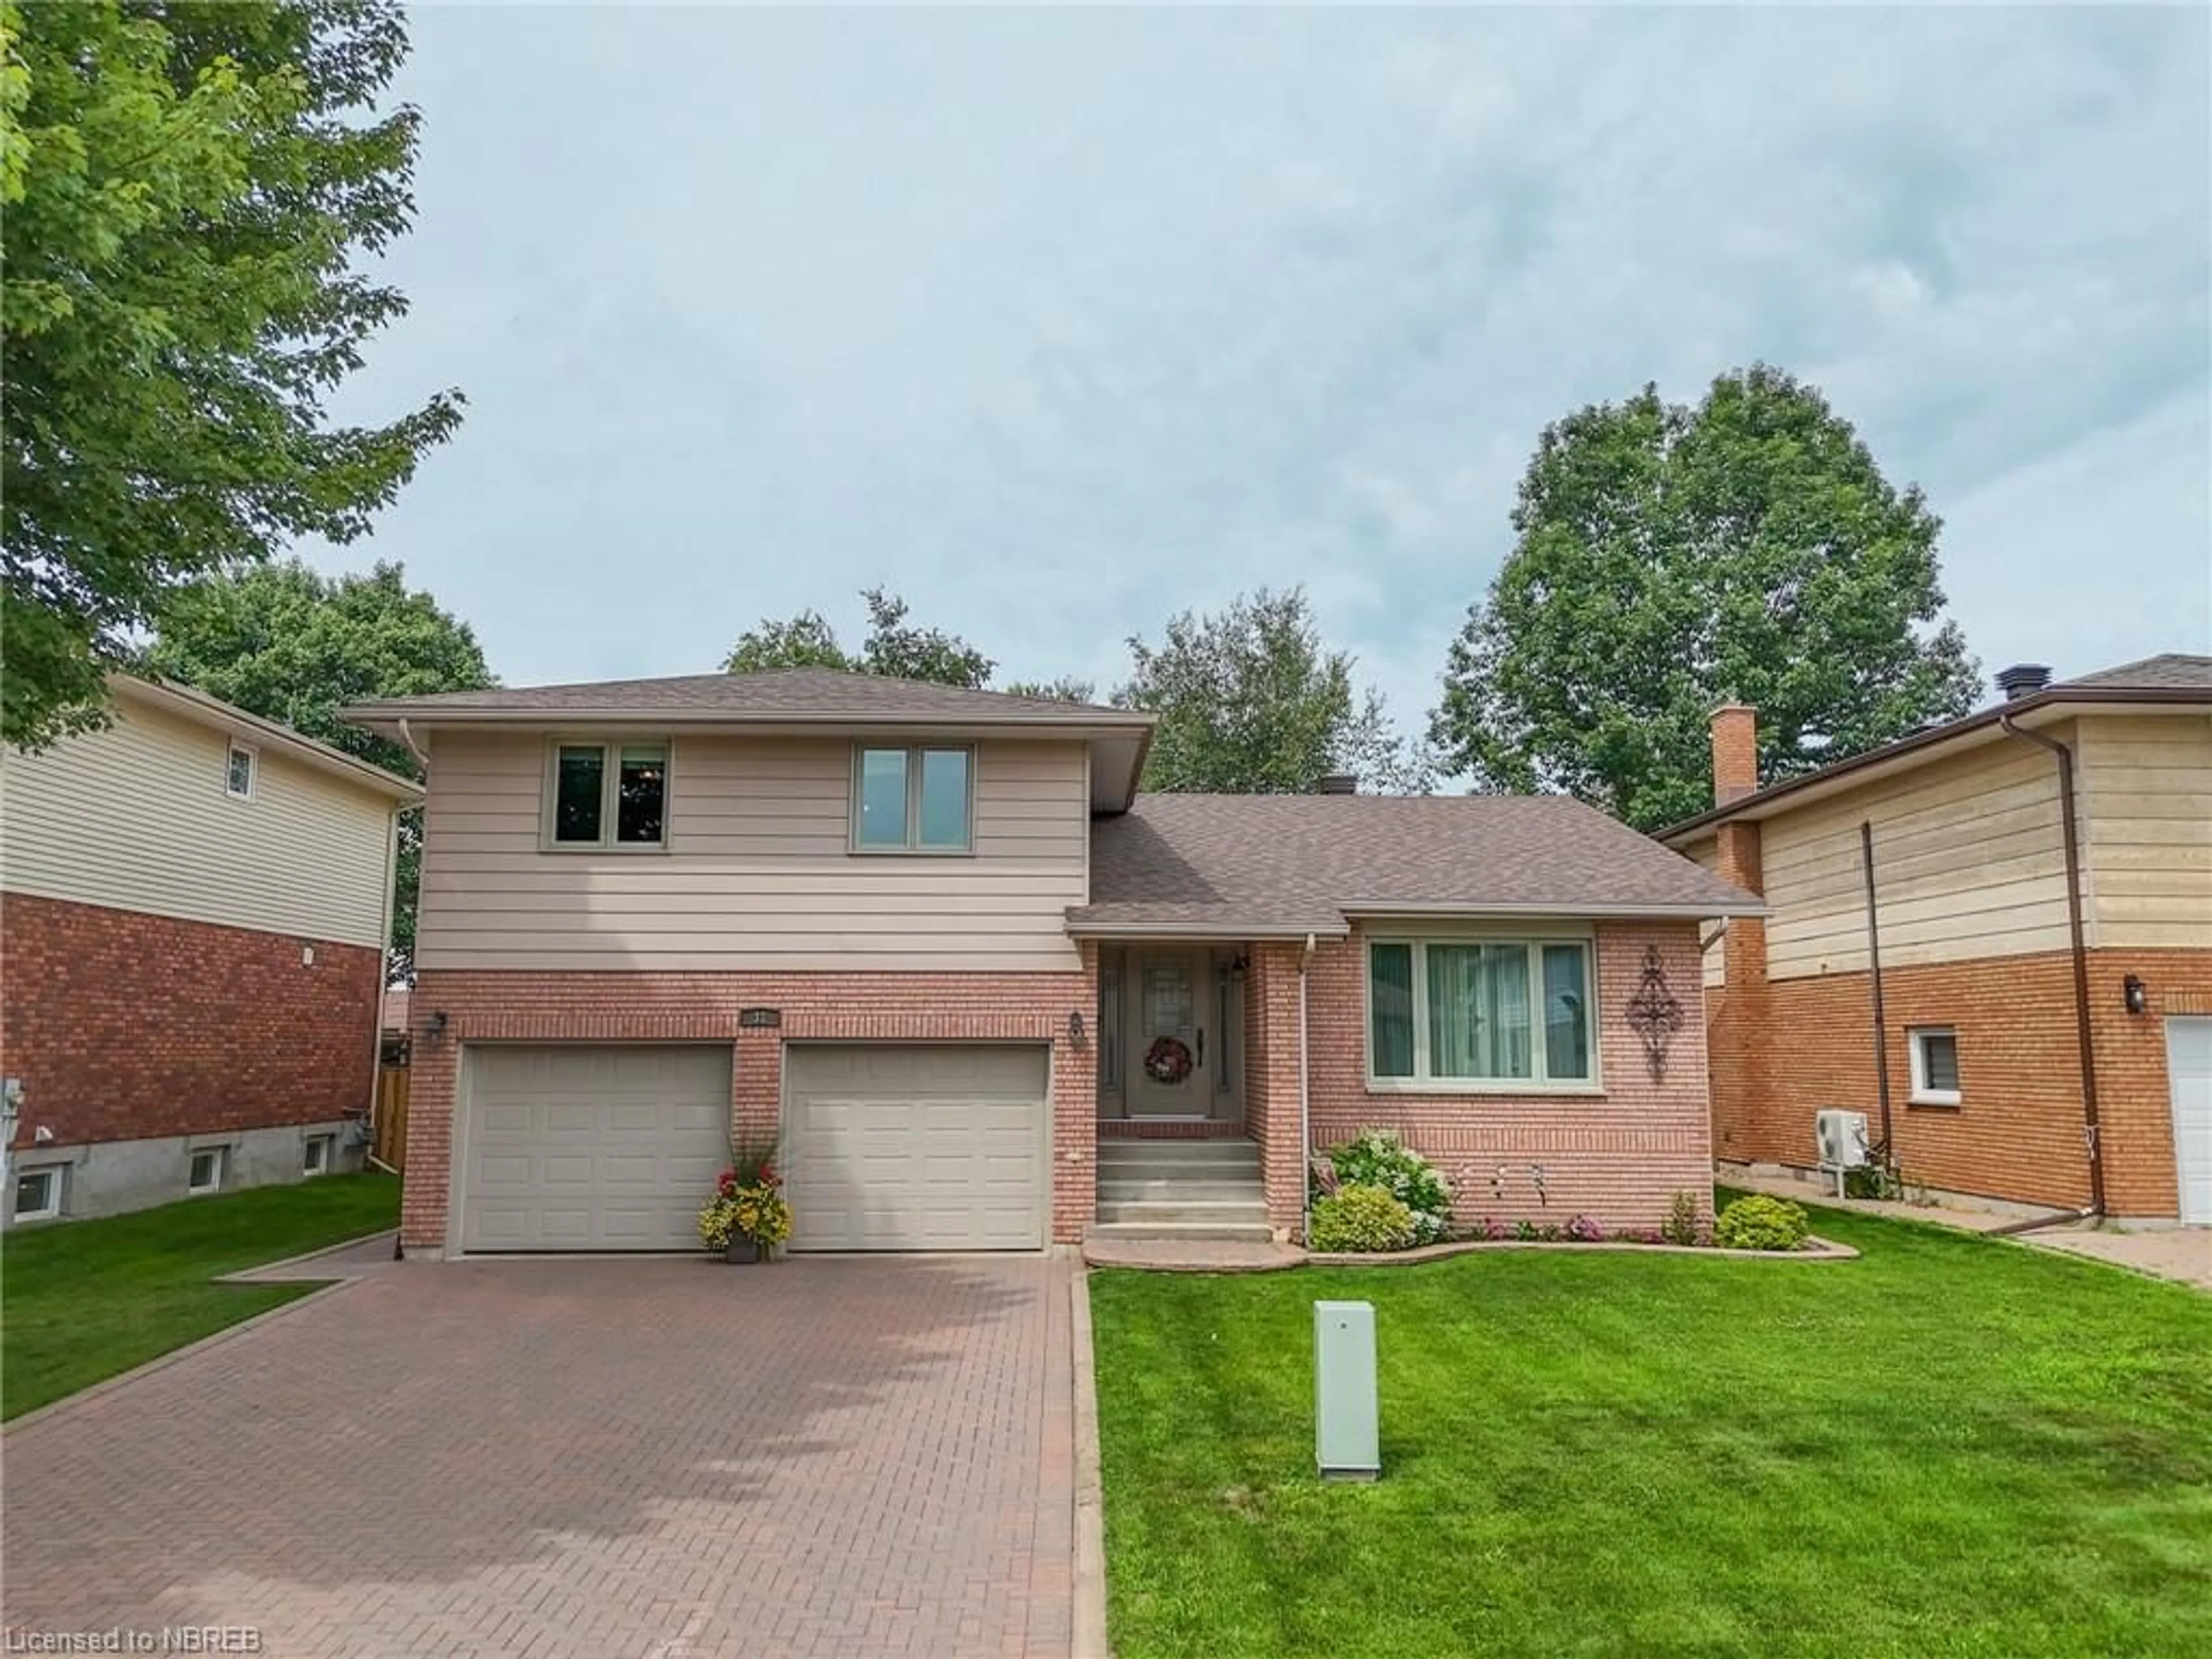 Home with brick exterior material for 31 Veronica Dr, North Bay Ontario P1B 9K4